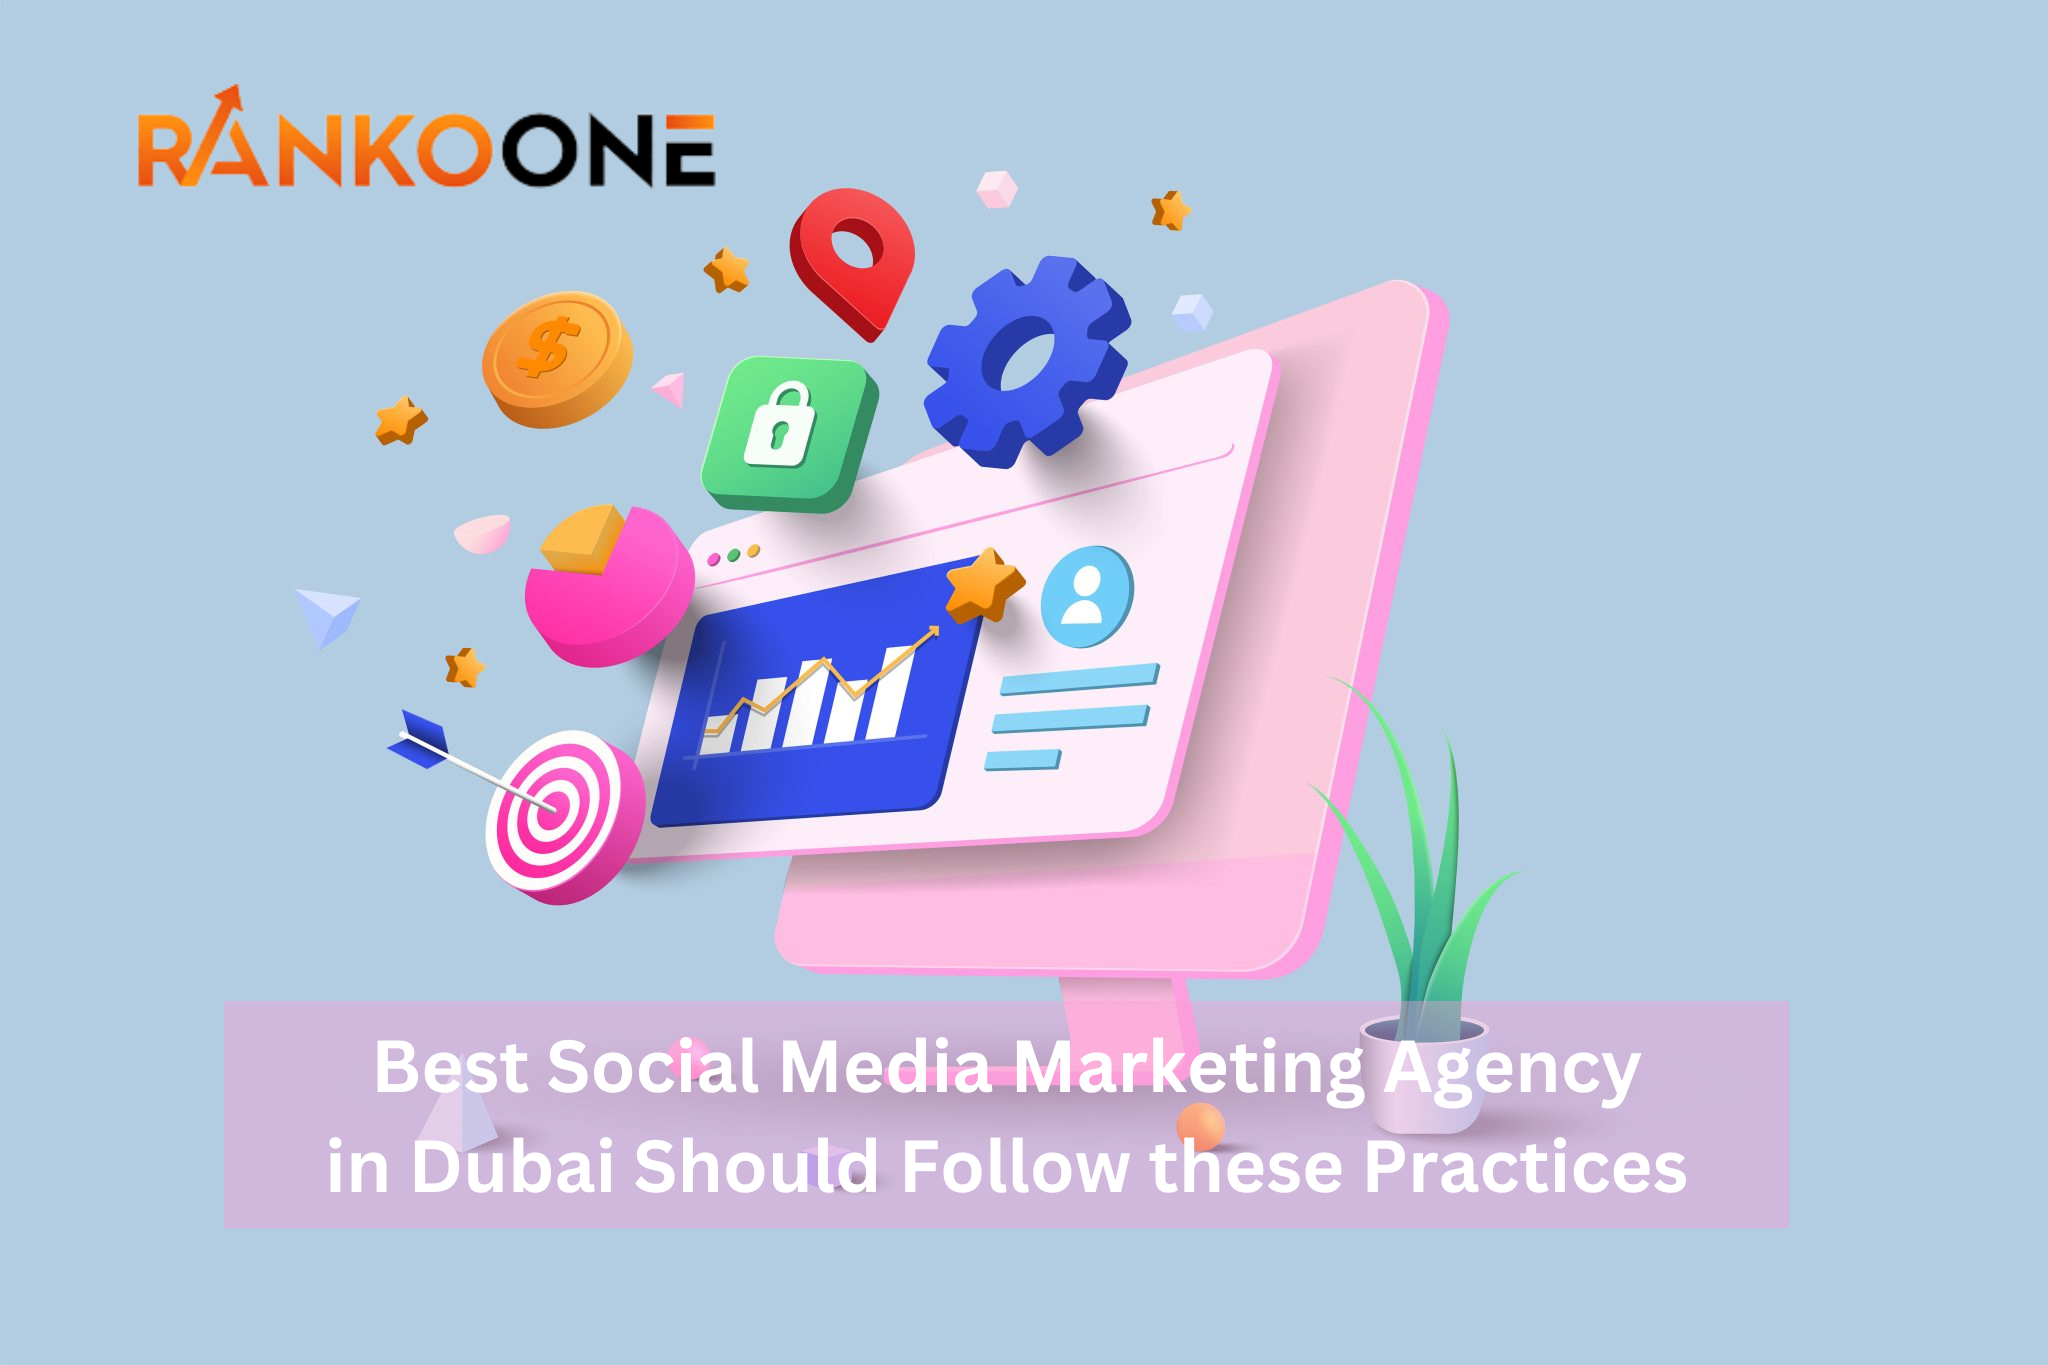 Best Social Media Marketing Agency in Dubai Should Follow these Practices